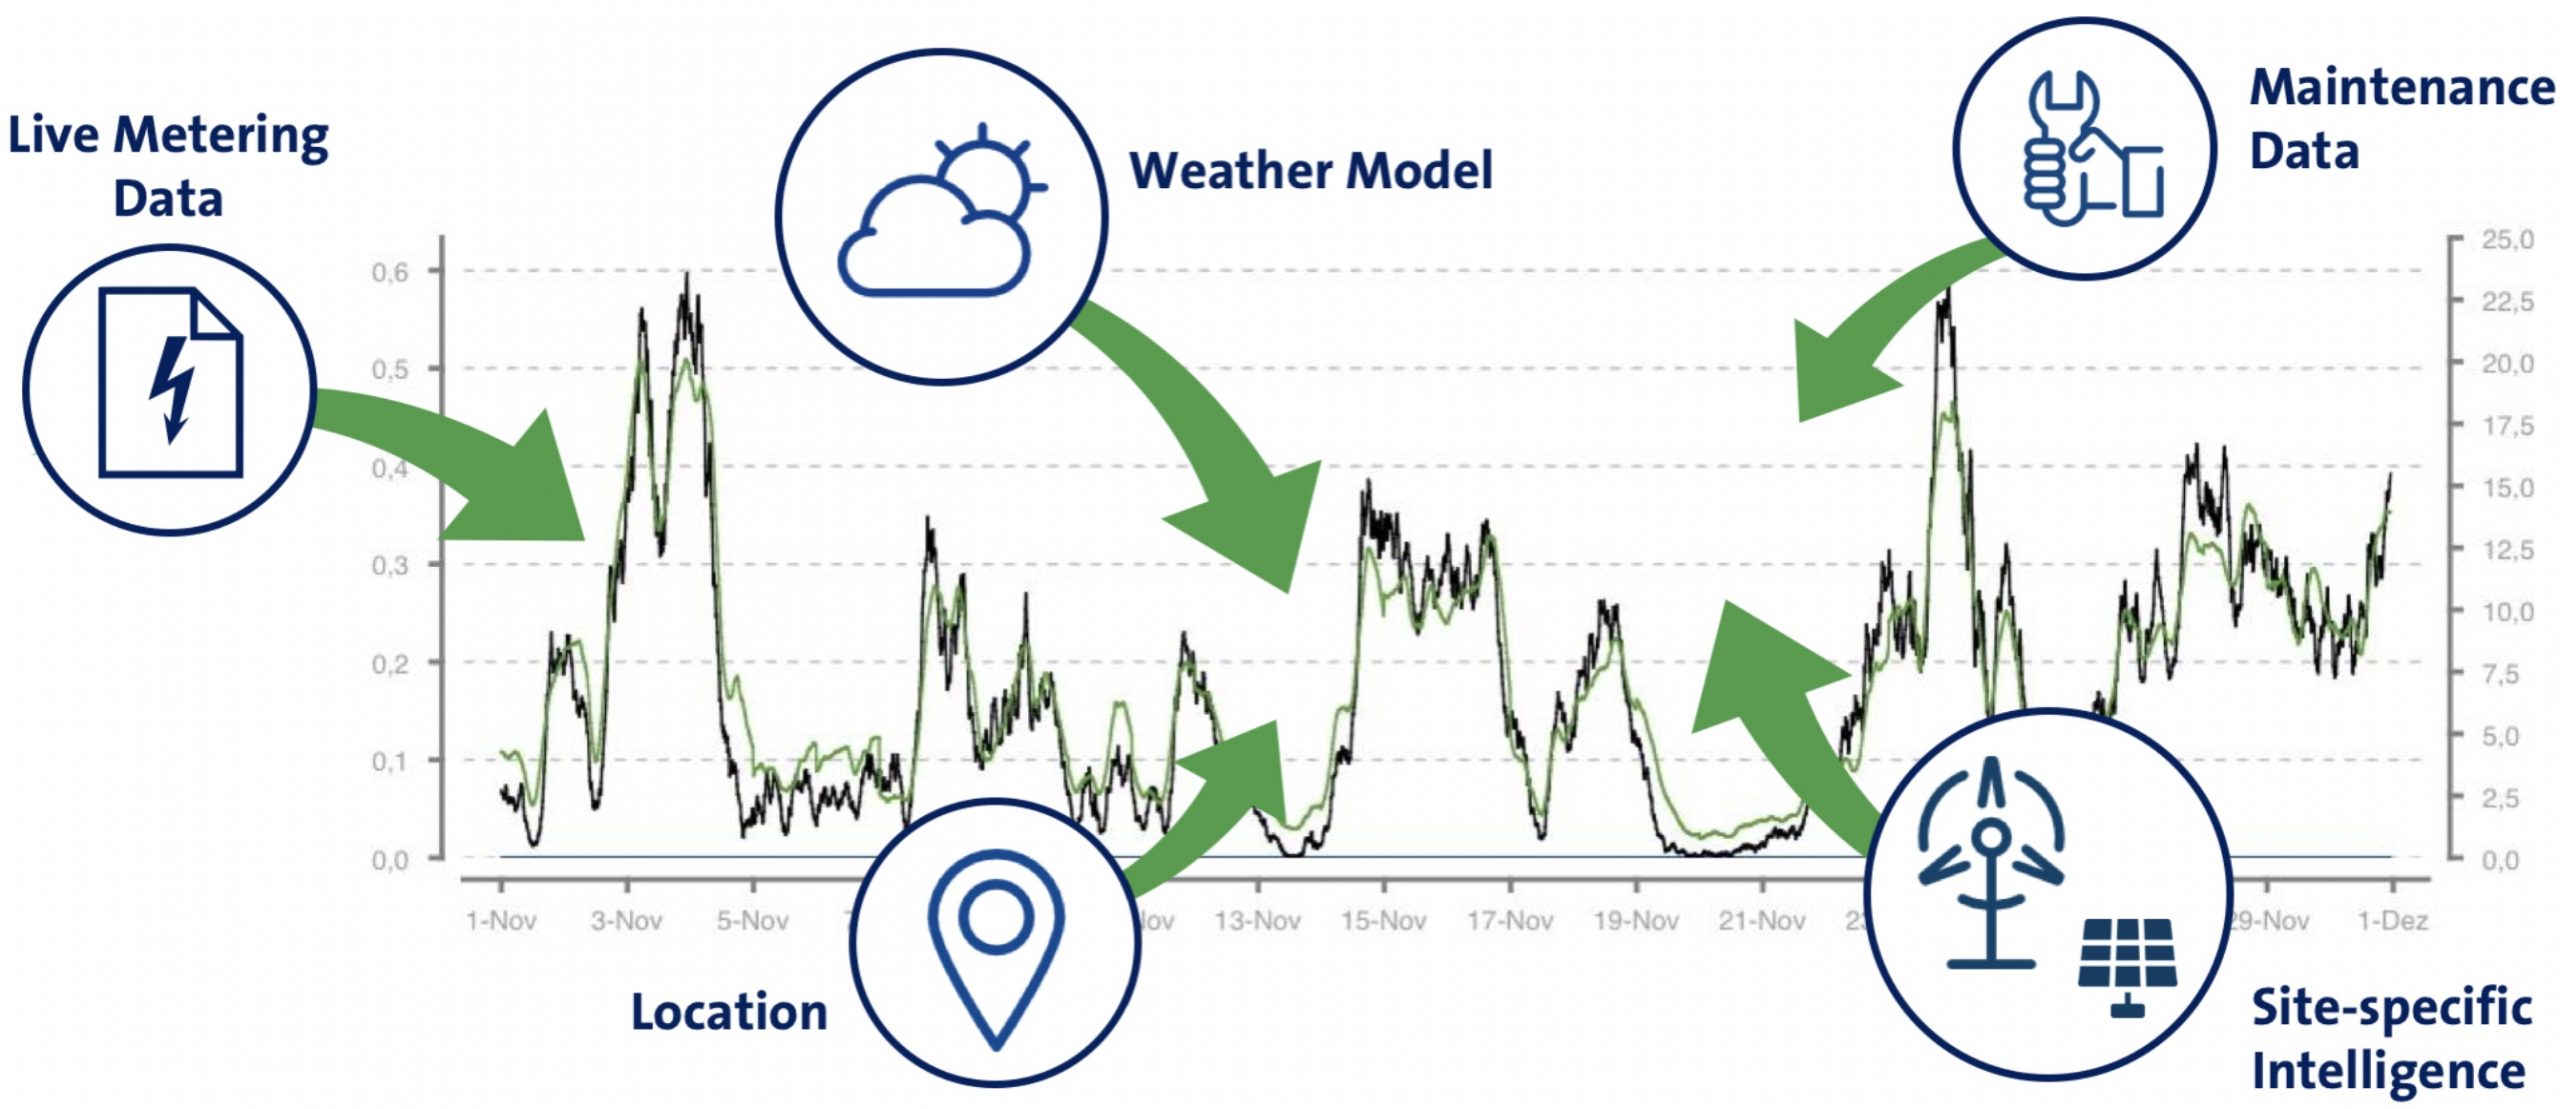 Power forecast ingredients: Weather models, location, site-specific intelligence, maintenance data, live meter data